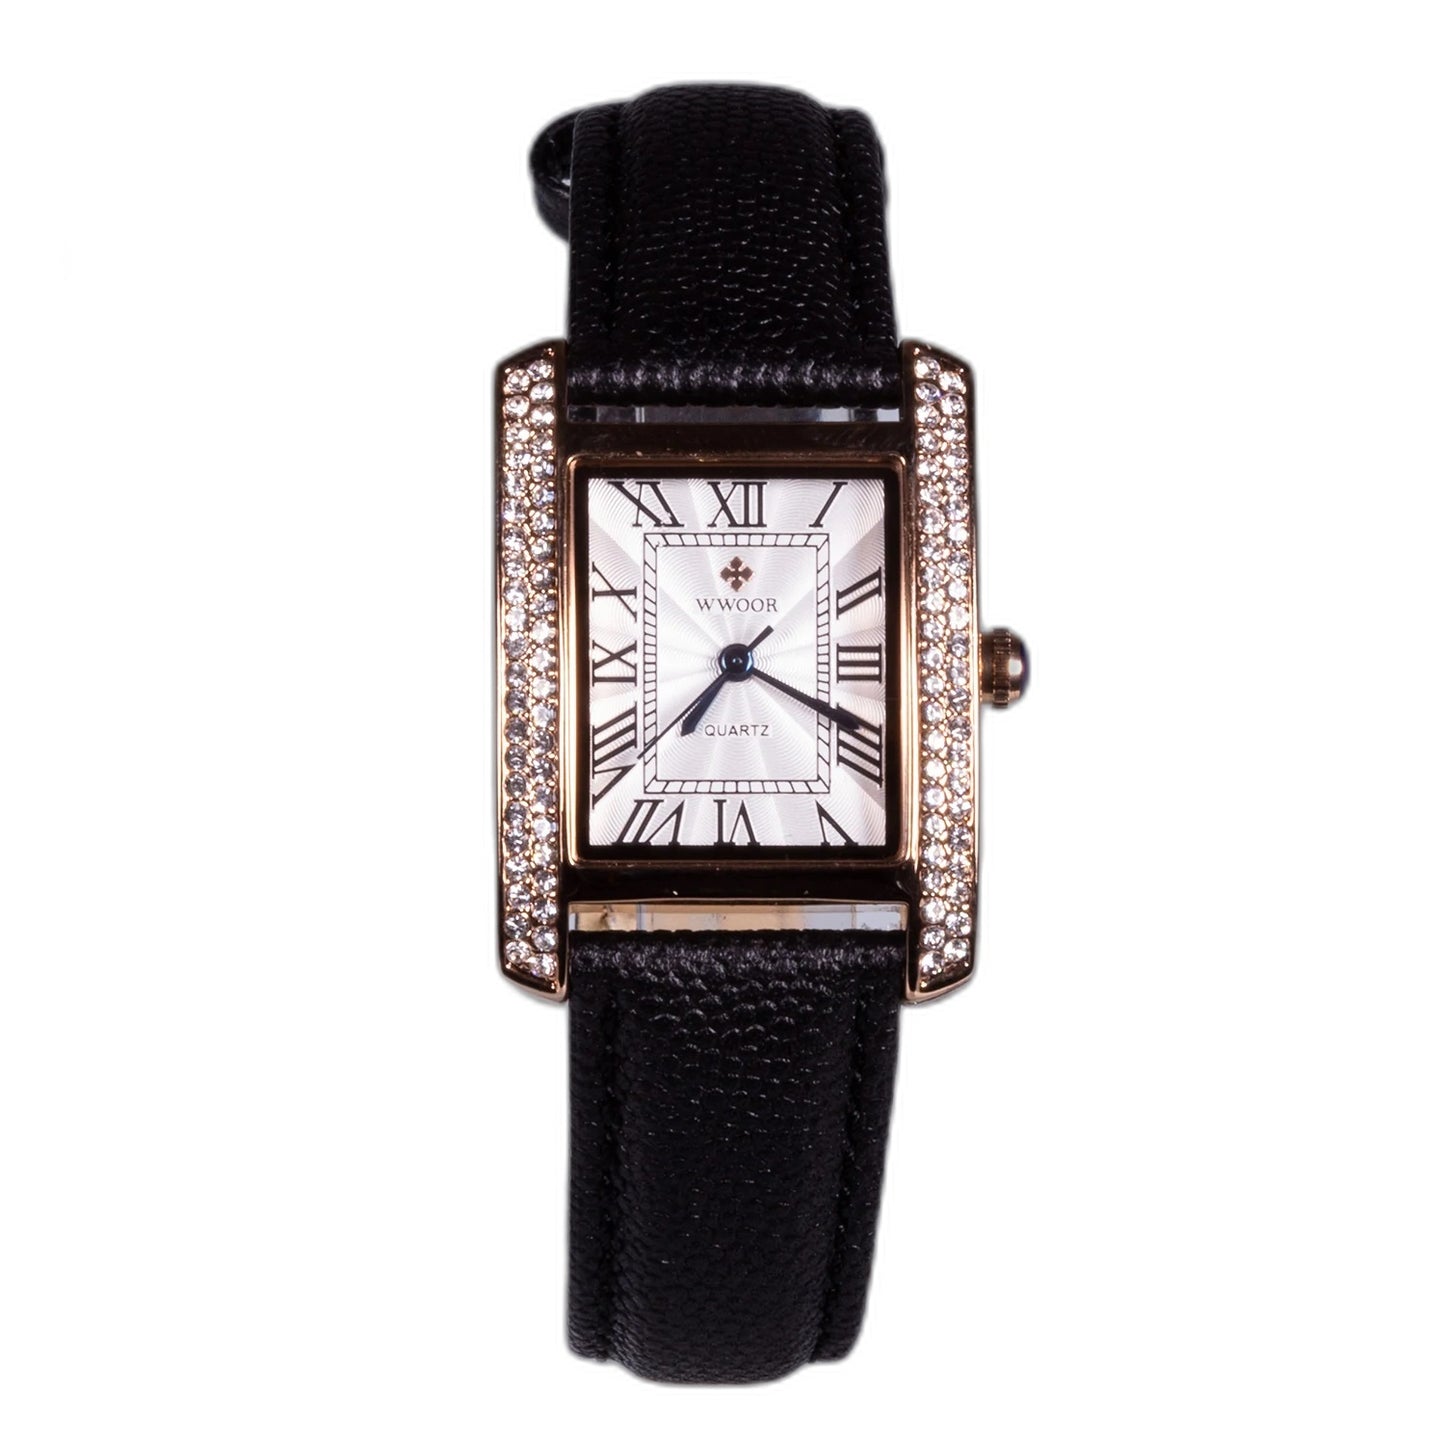 YELLOW gold colour case, black genuine leather band, stainless steel with white zircon watch